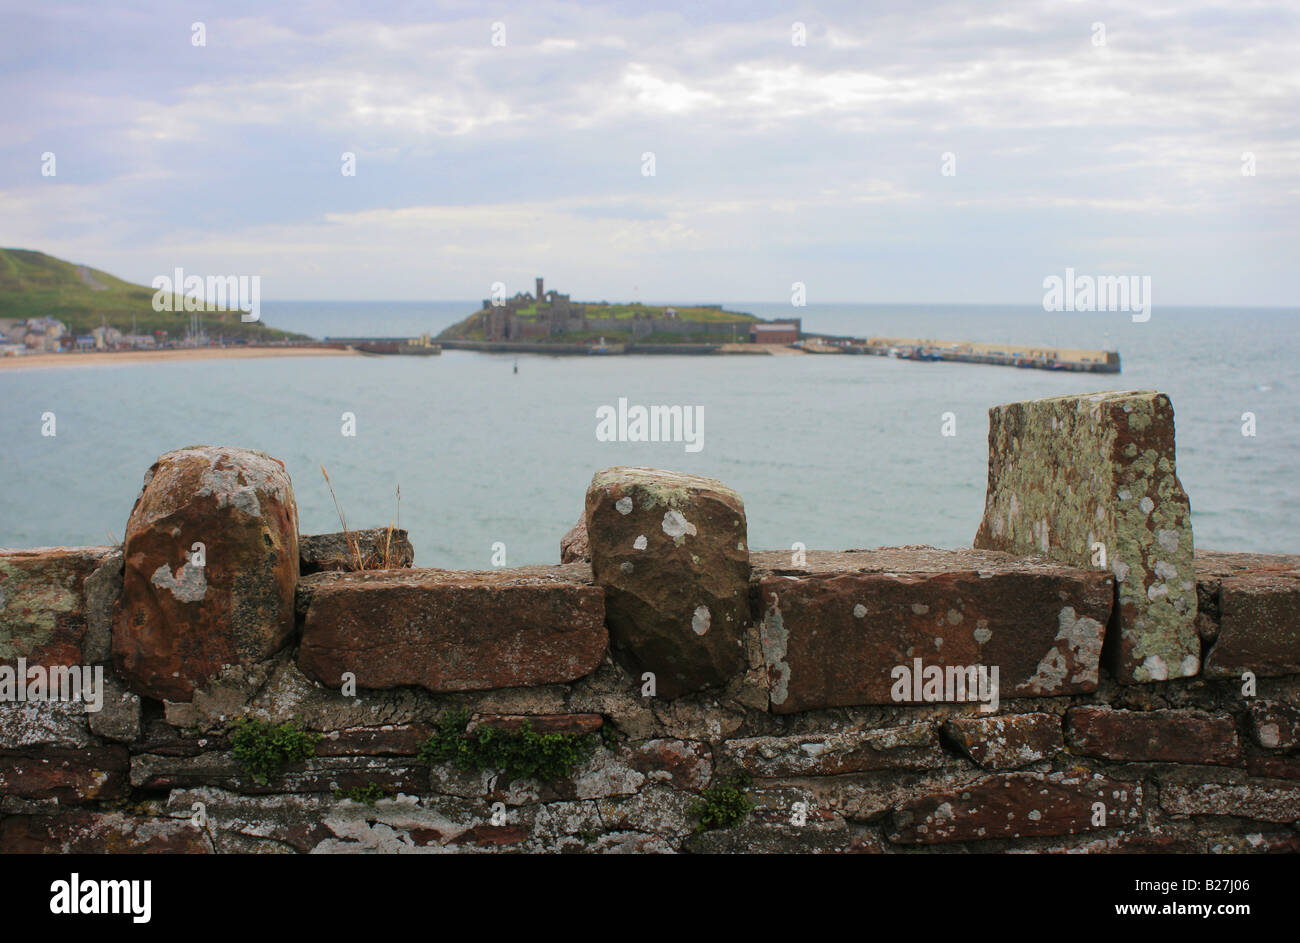 St Patrick Island, Peel, seen from behind an old stone wall, Isle of Man. Stock Photo